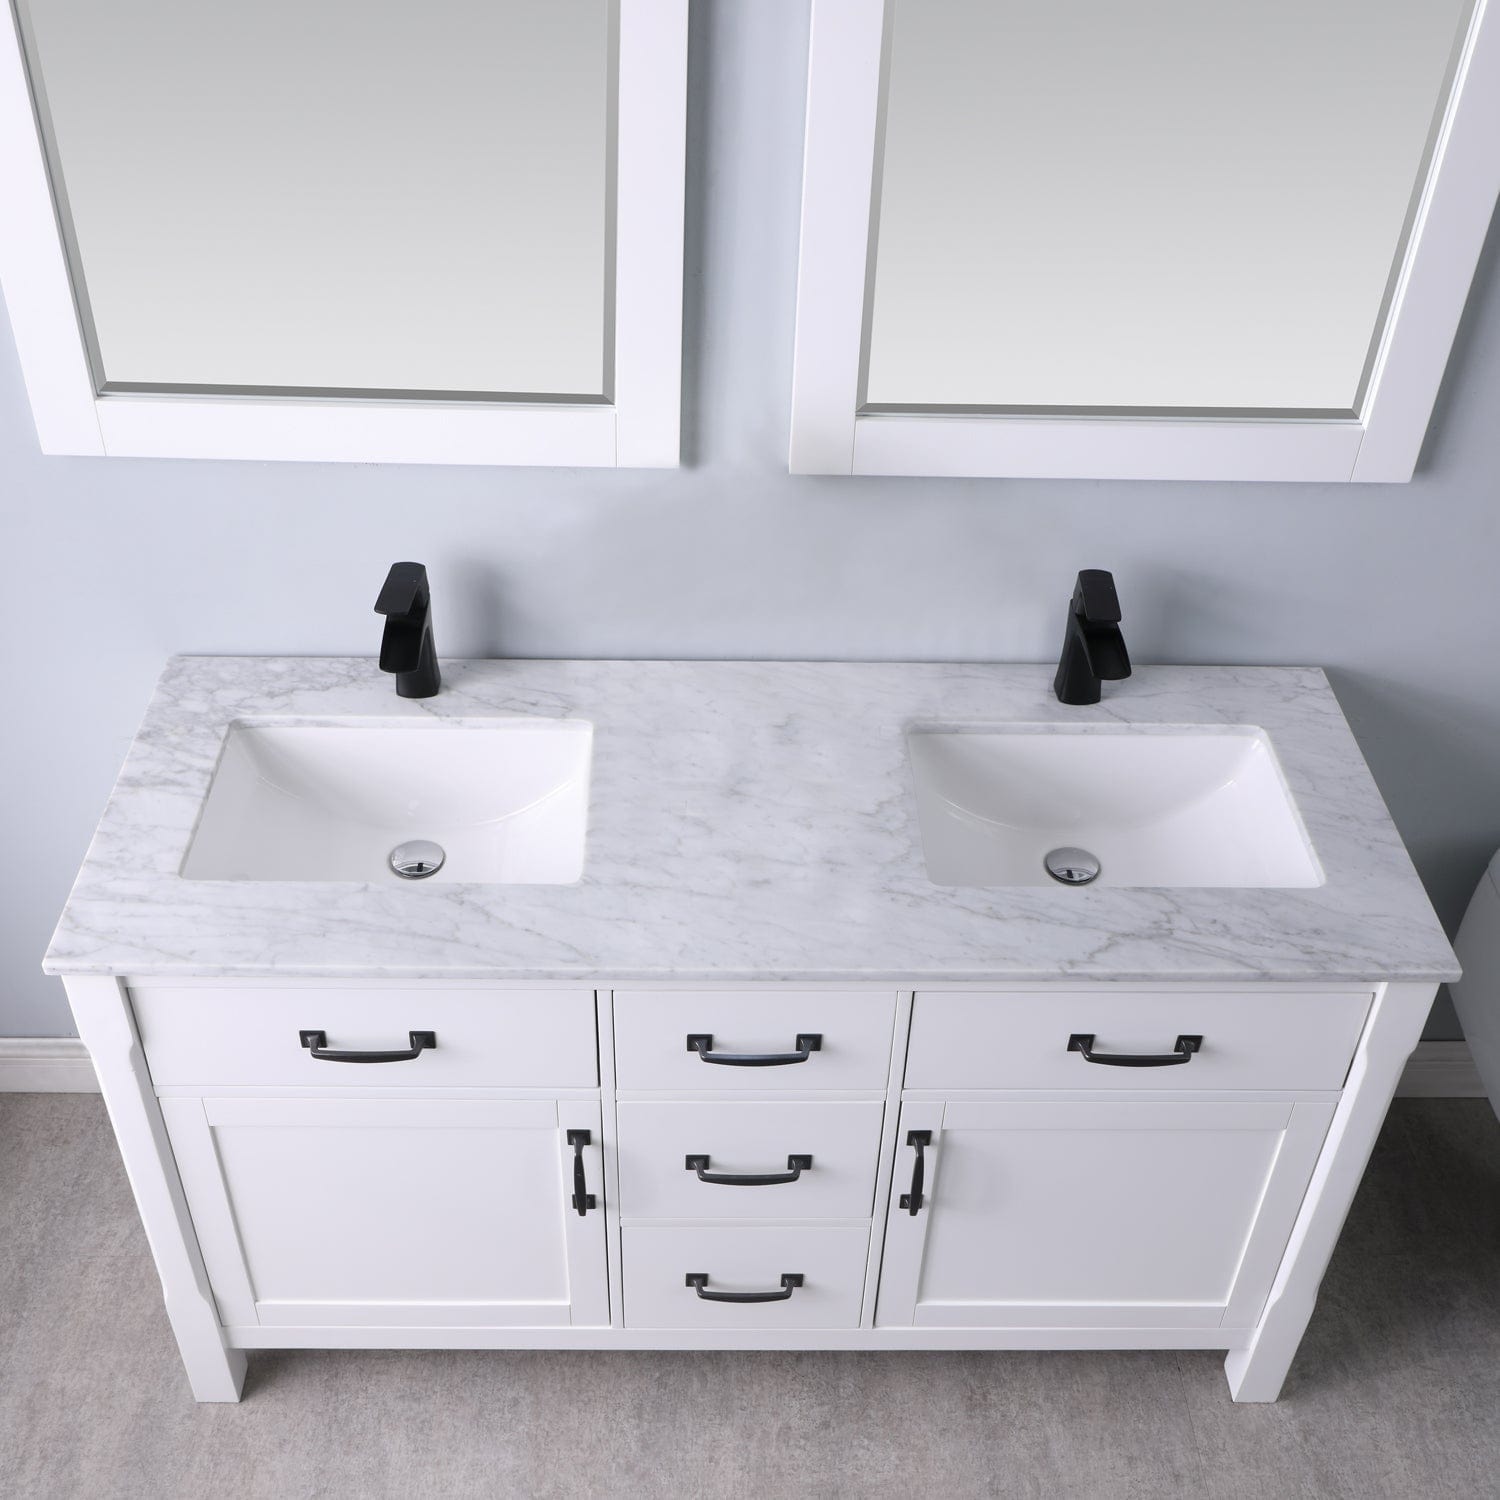 Altair Maribella 60" Double Bathroom Vanity Set in White and Carrara White Marble Countertop with Mirror 535060-WH-CA - Molaix631112970372Vanity535060-WH-CA